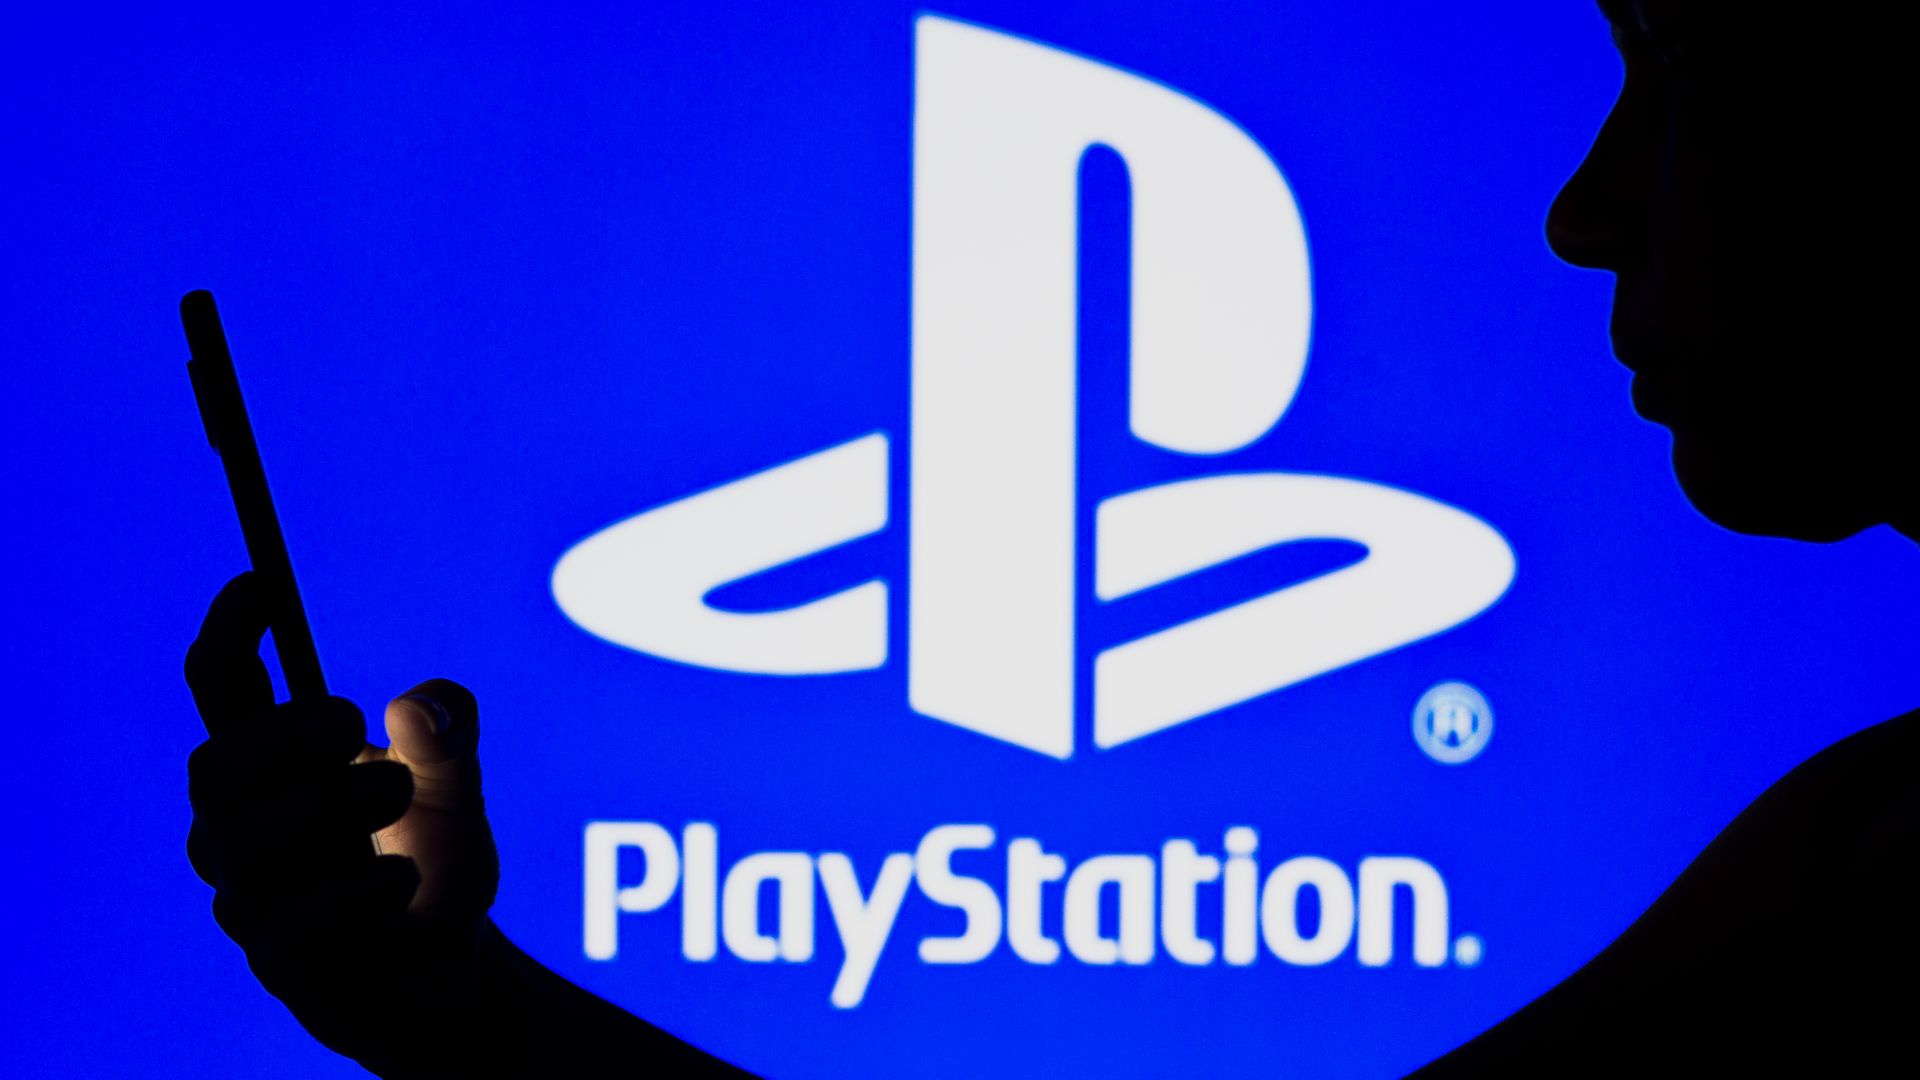 PlayStation logo and the silhouette of a woman holding a phone